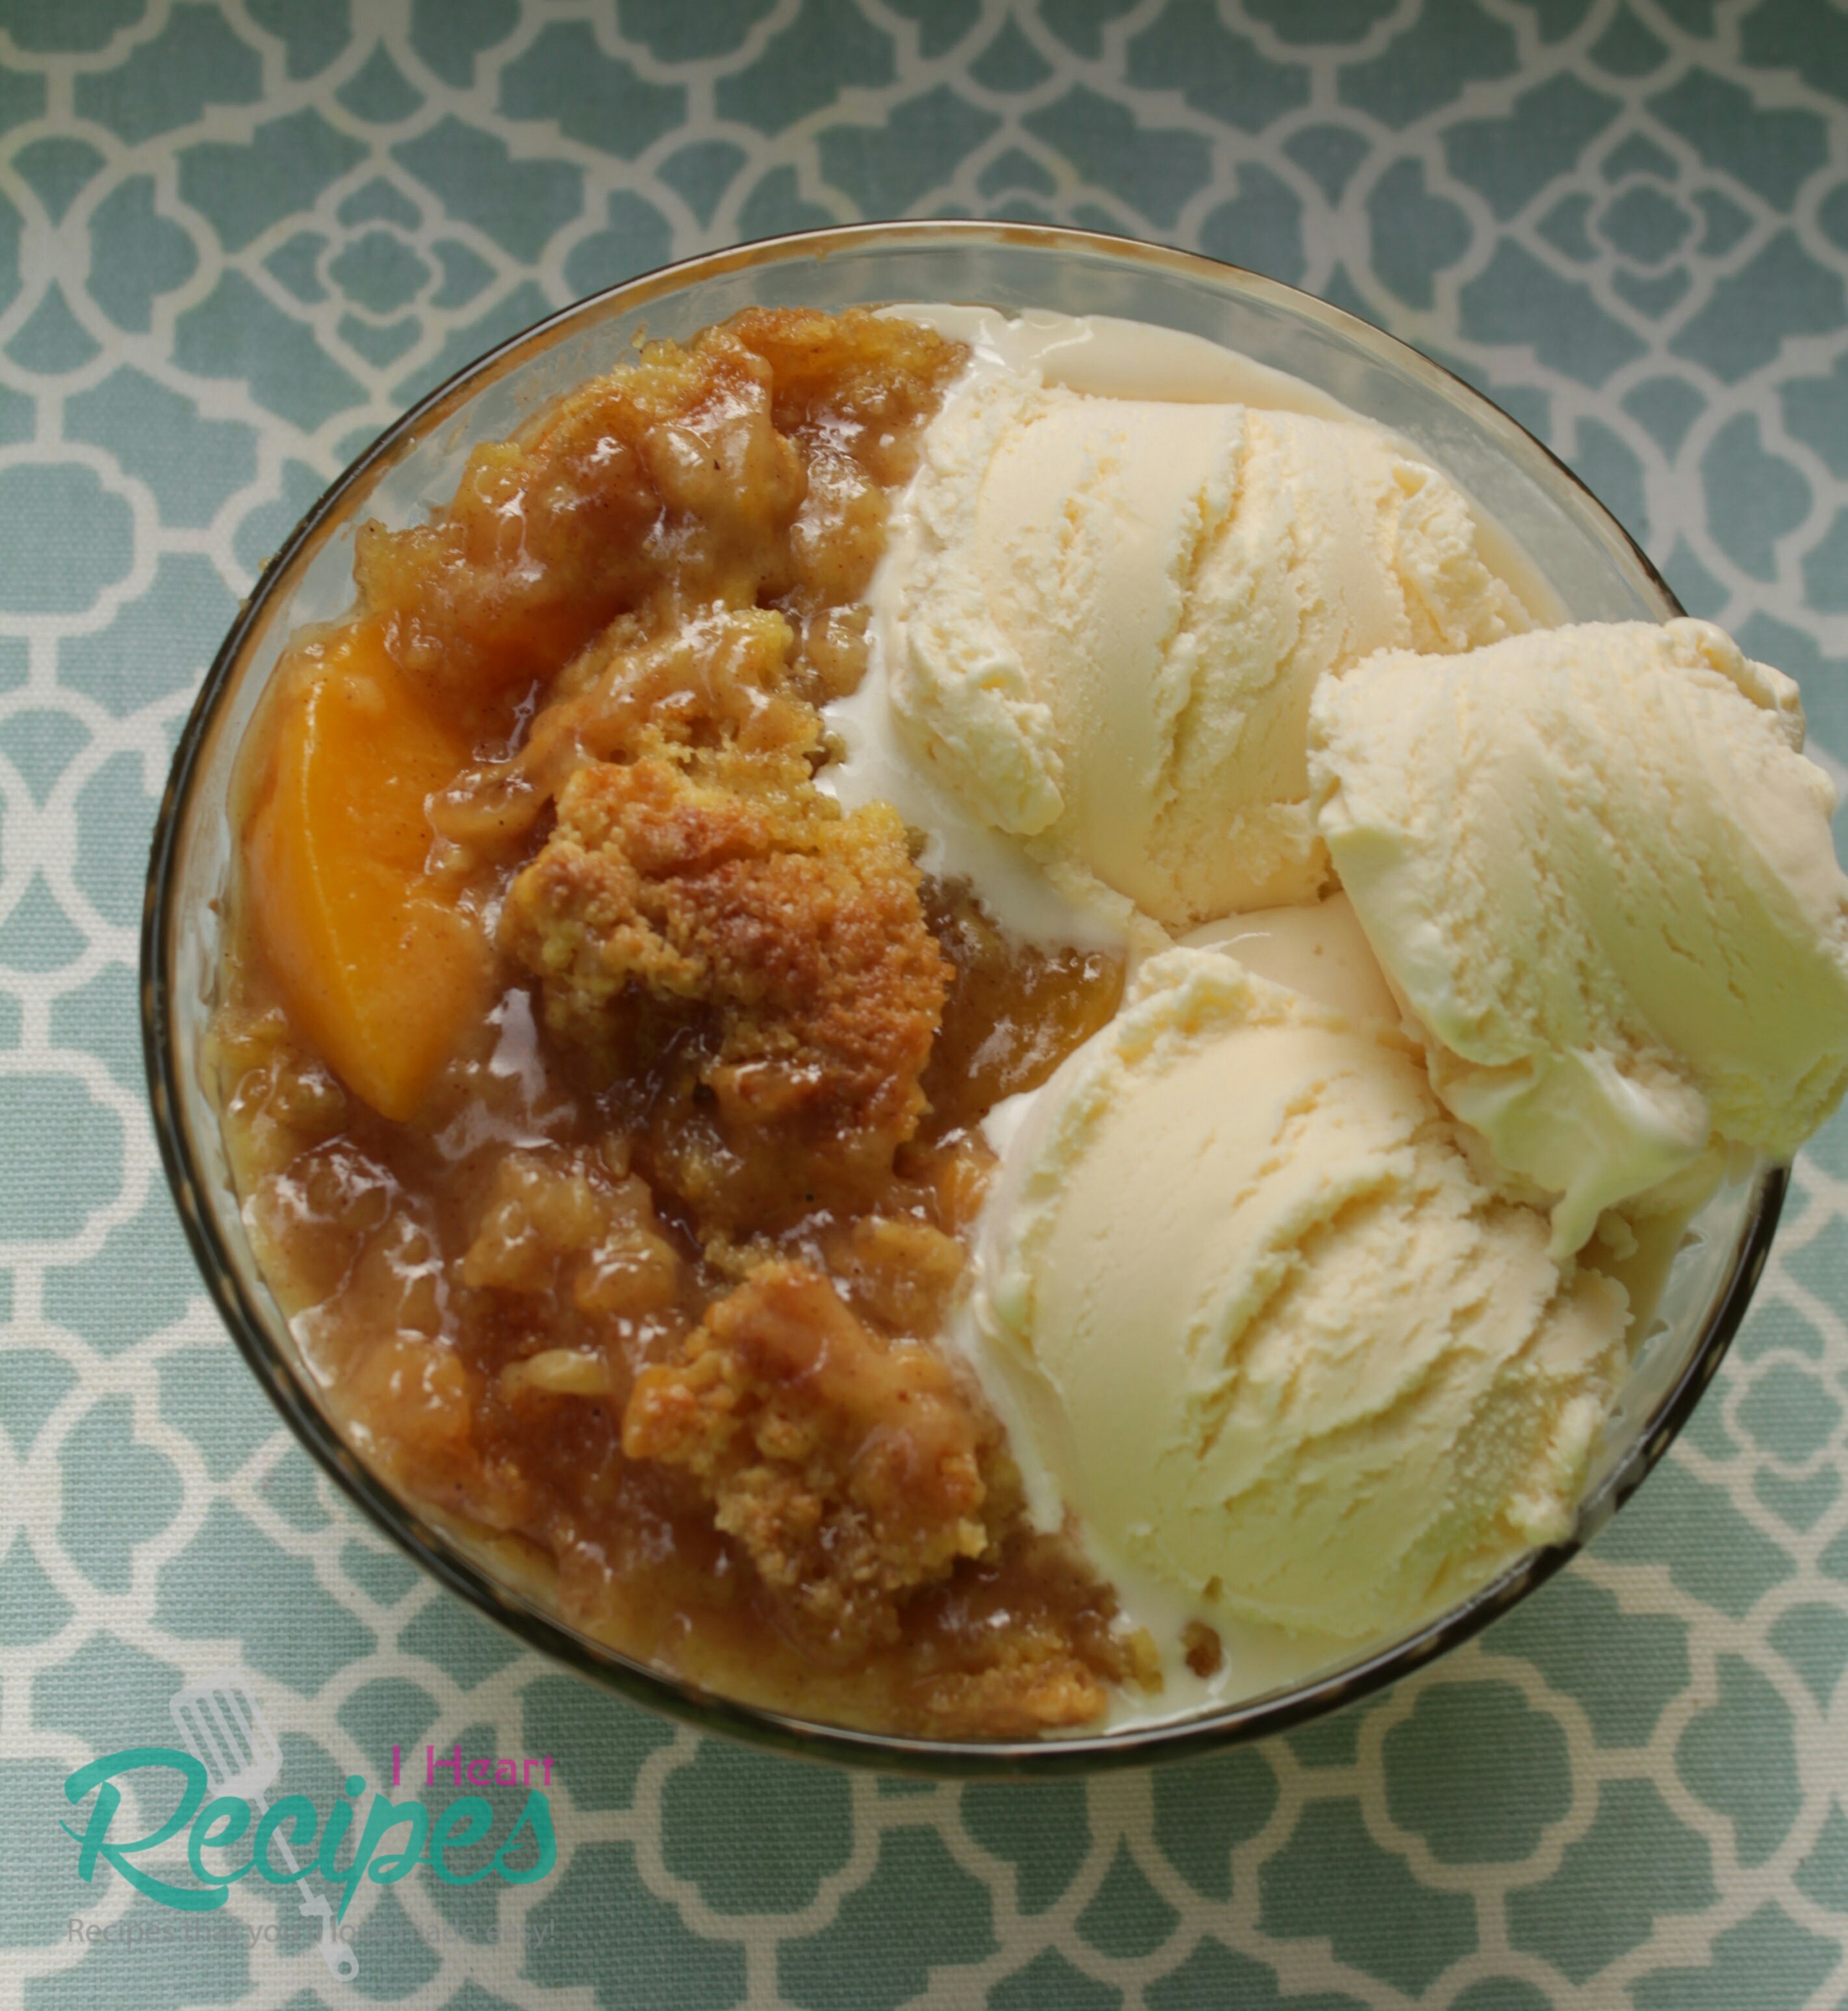 Juicy Ciroc vodka infused peaches with a crispy cobbler crumble paired with vanilla ice cream